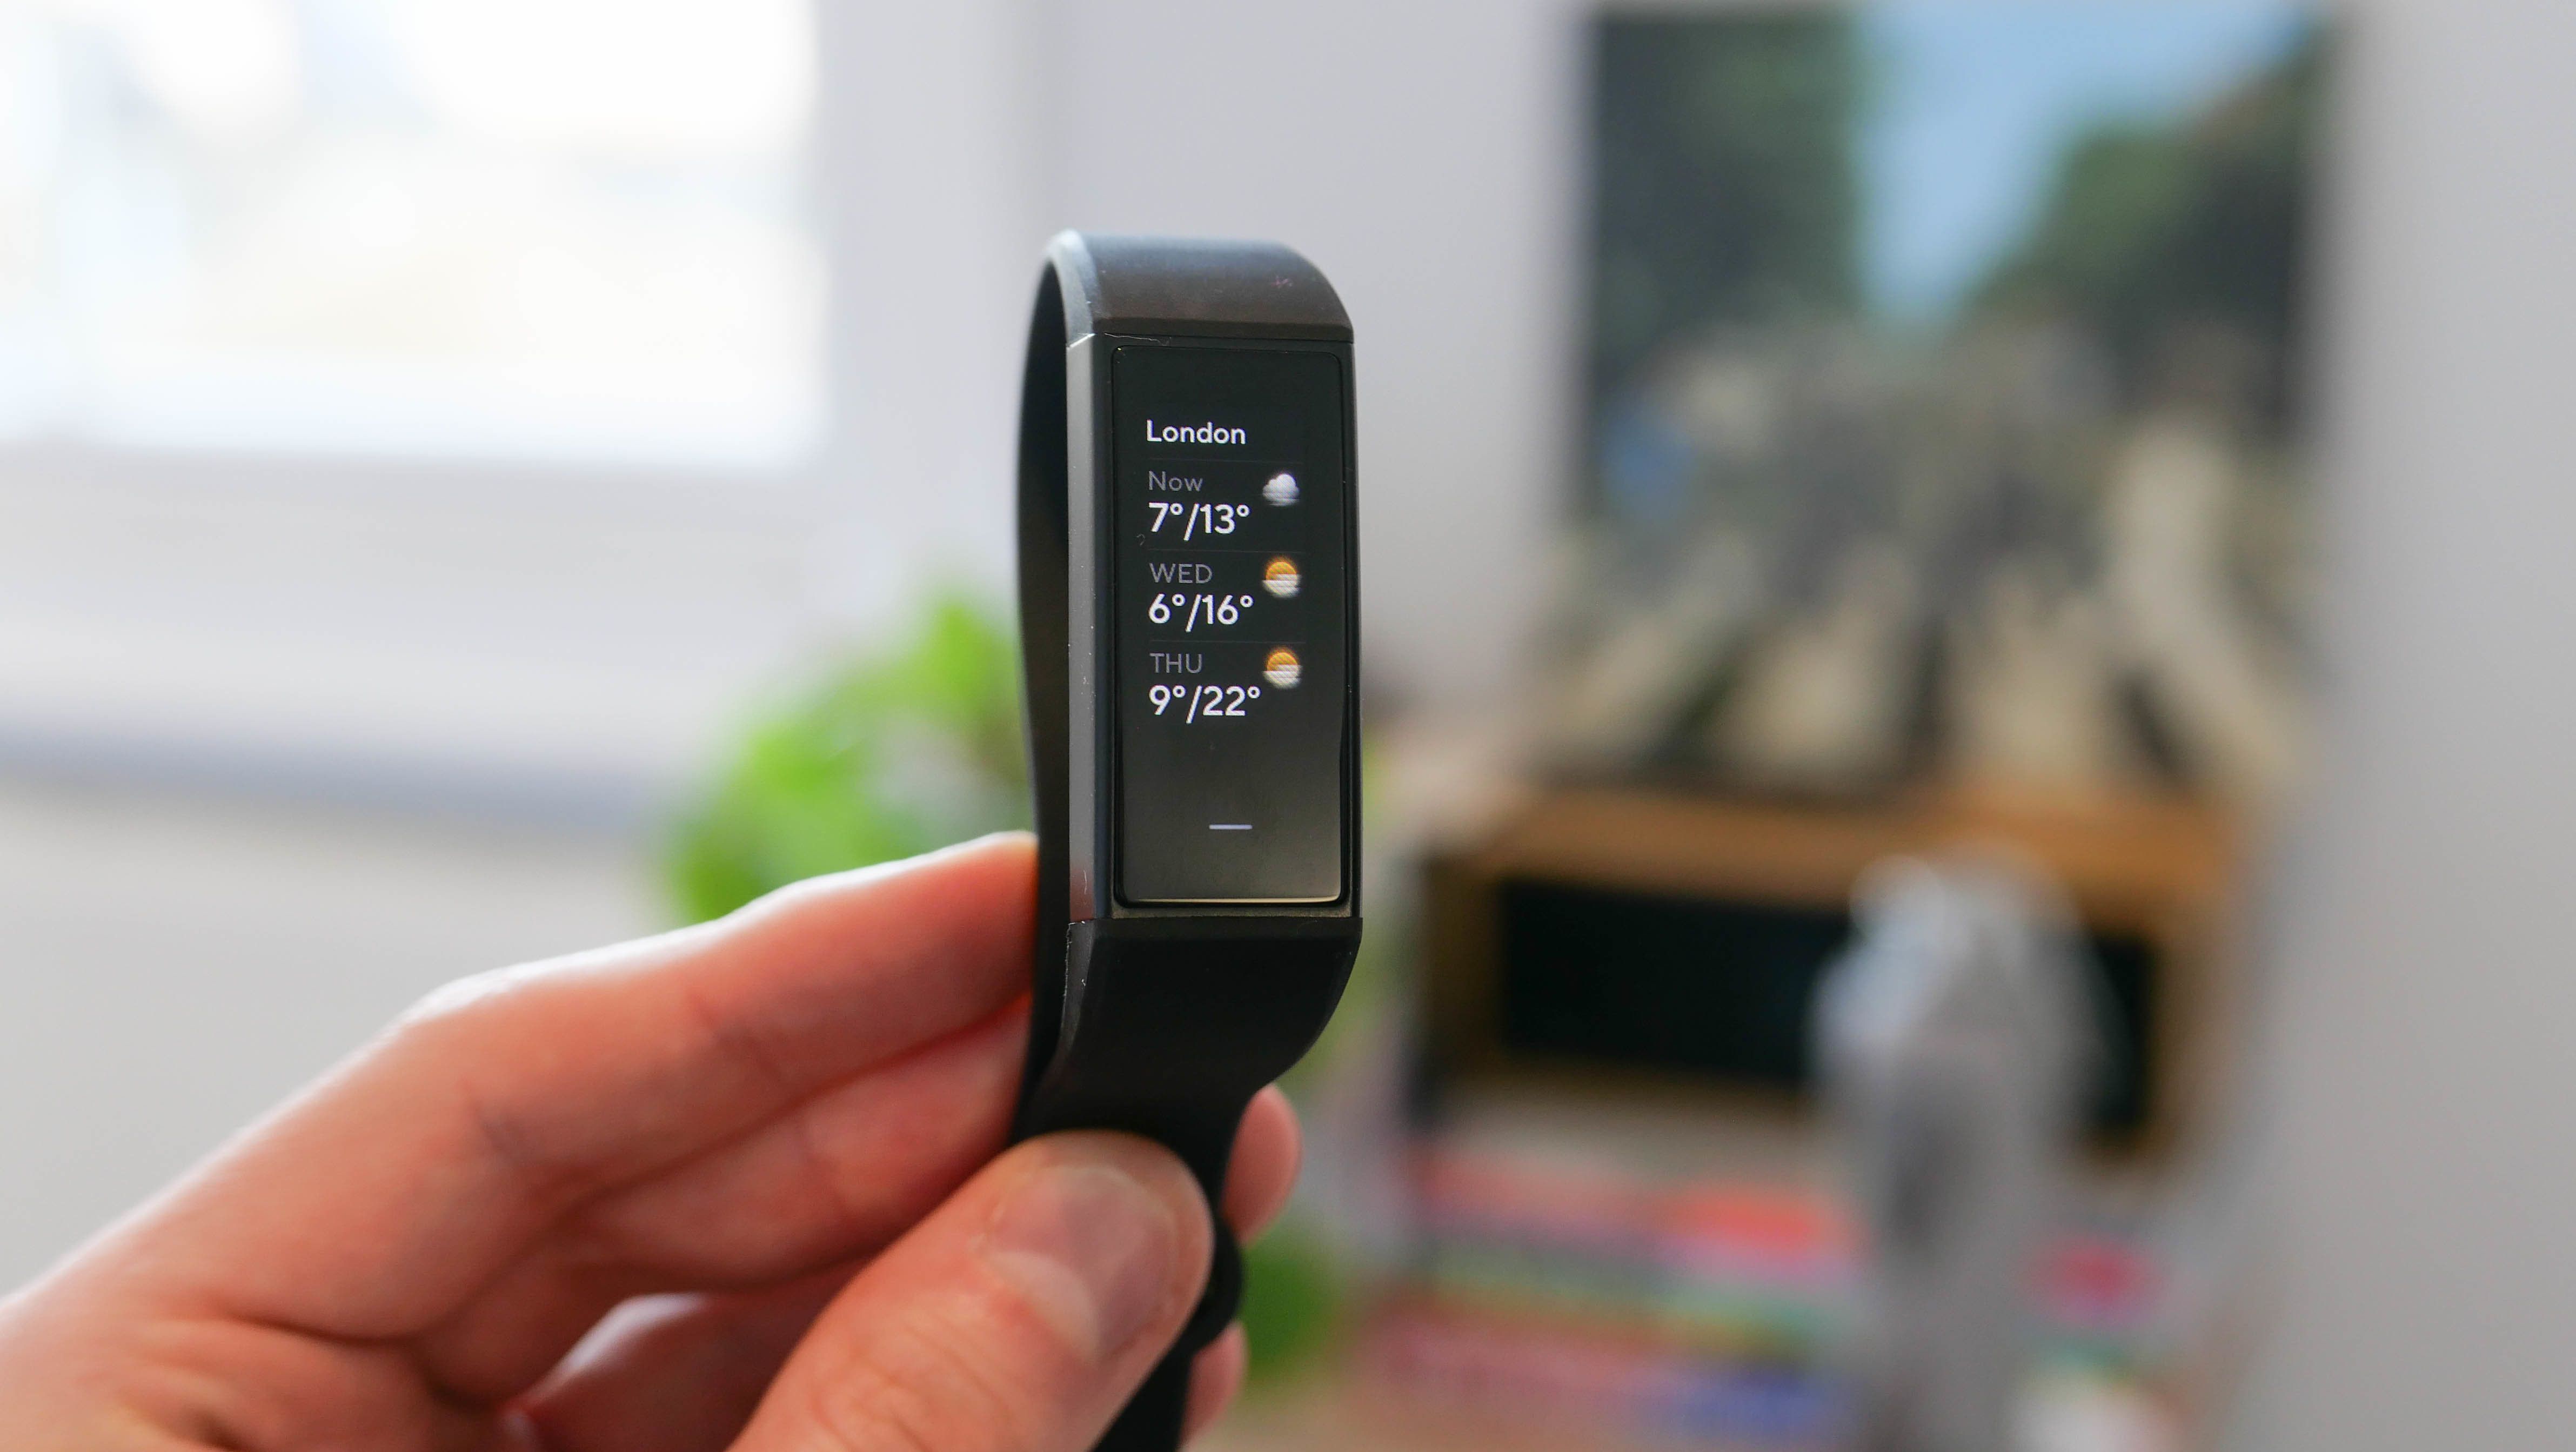 Wyze takes aim at Fitbit and Apple with new $25 fitness band and